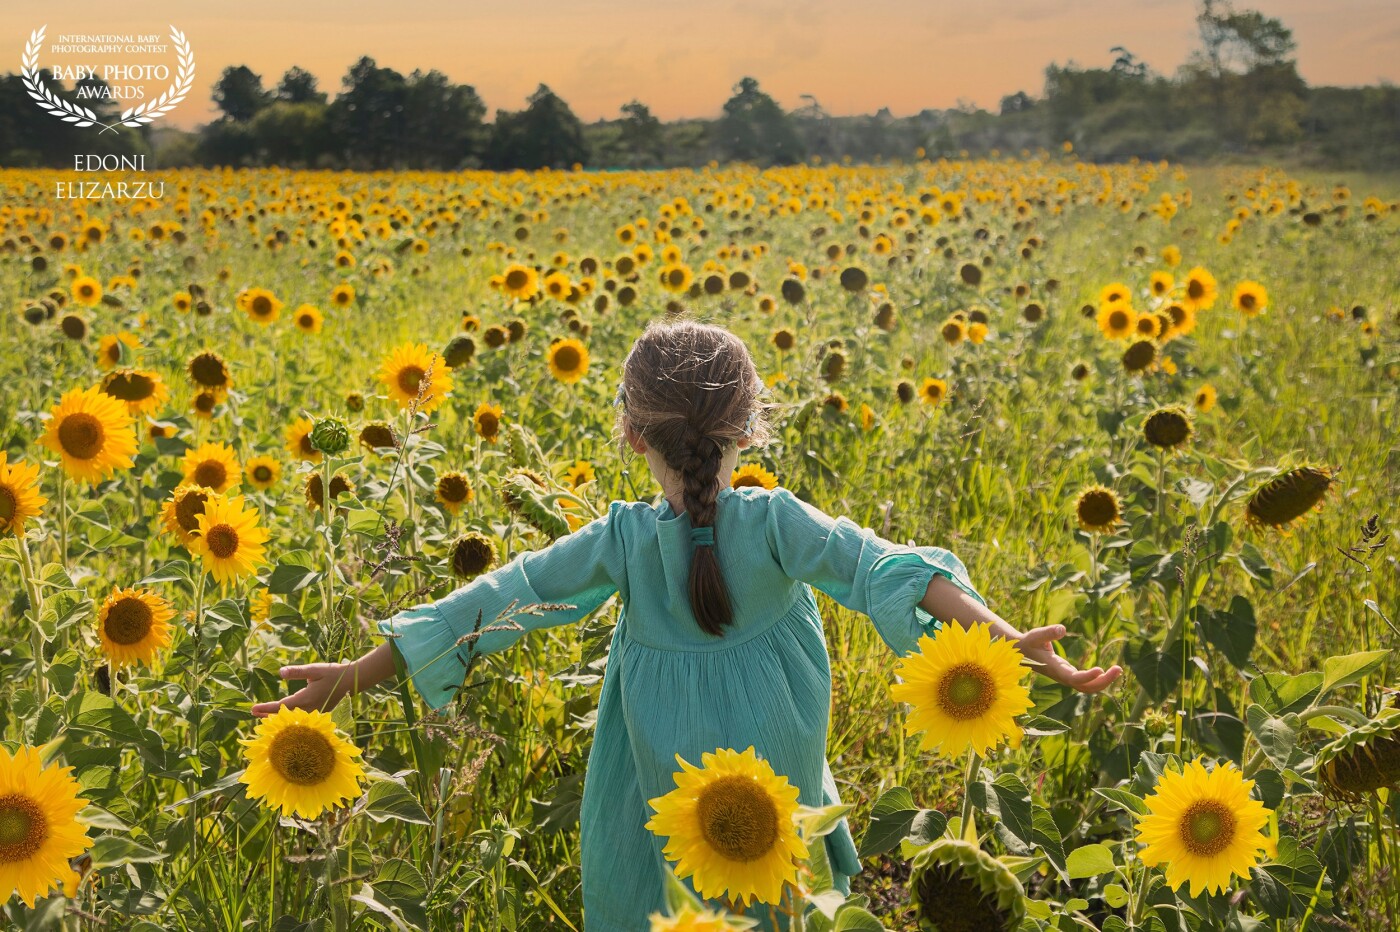 My little girl in a field of sunflowers! On a sunny afternoon, we found this field and stopped to take some photos and enjoy the day